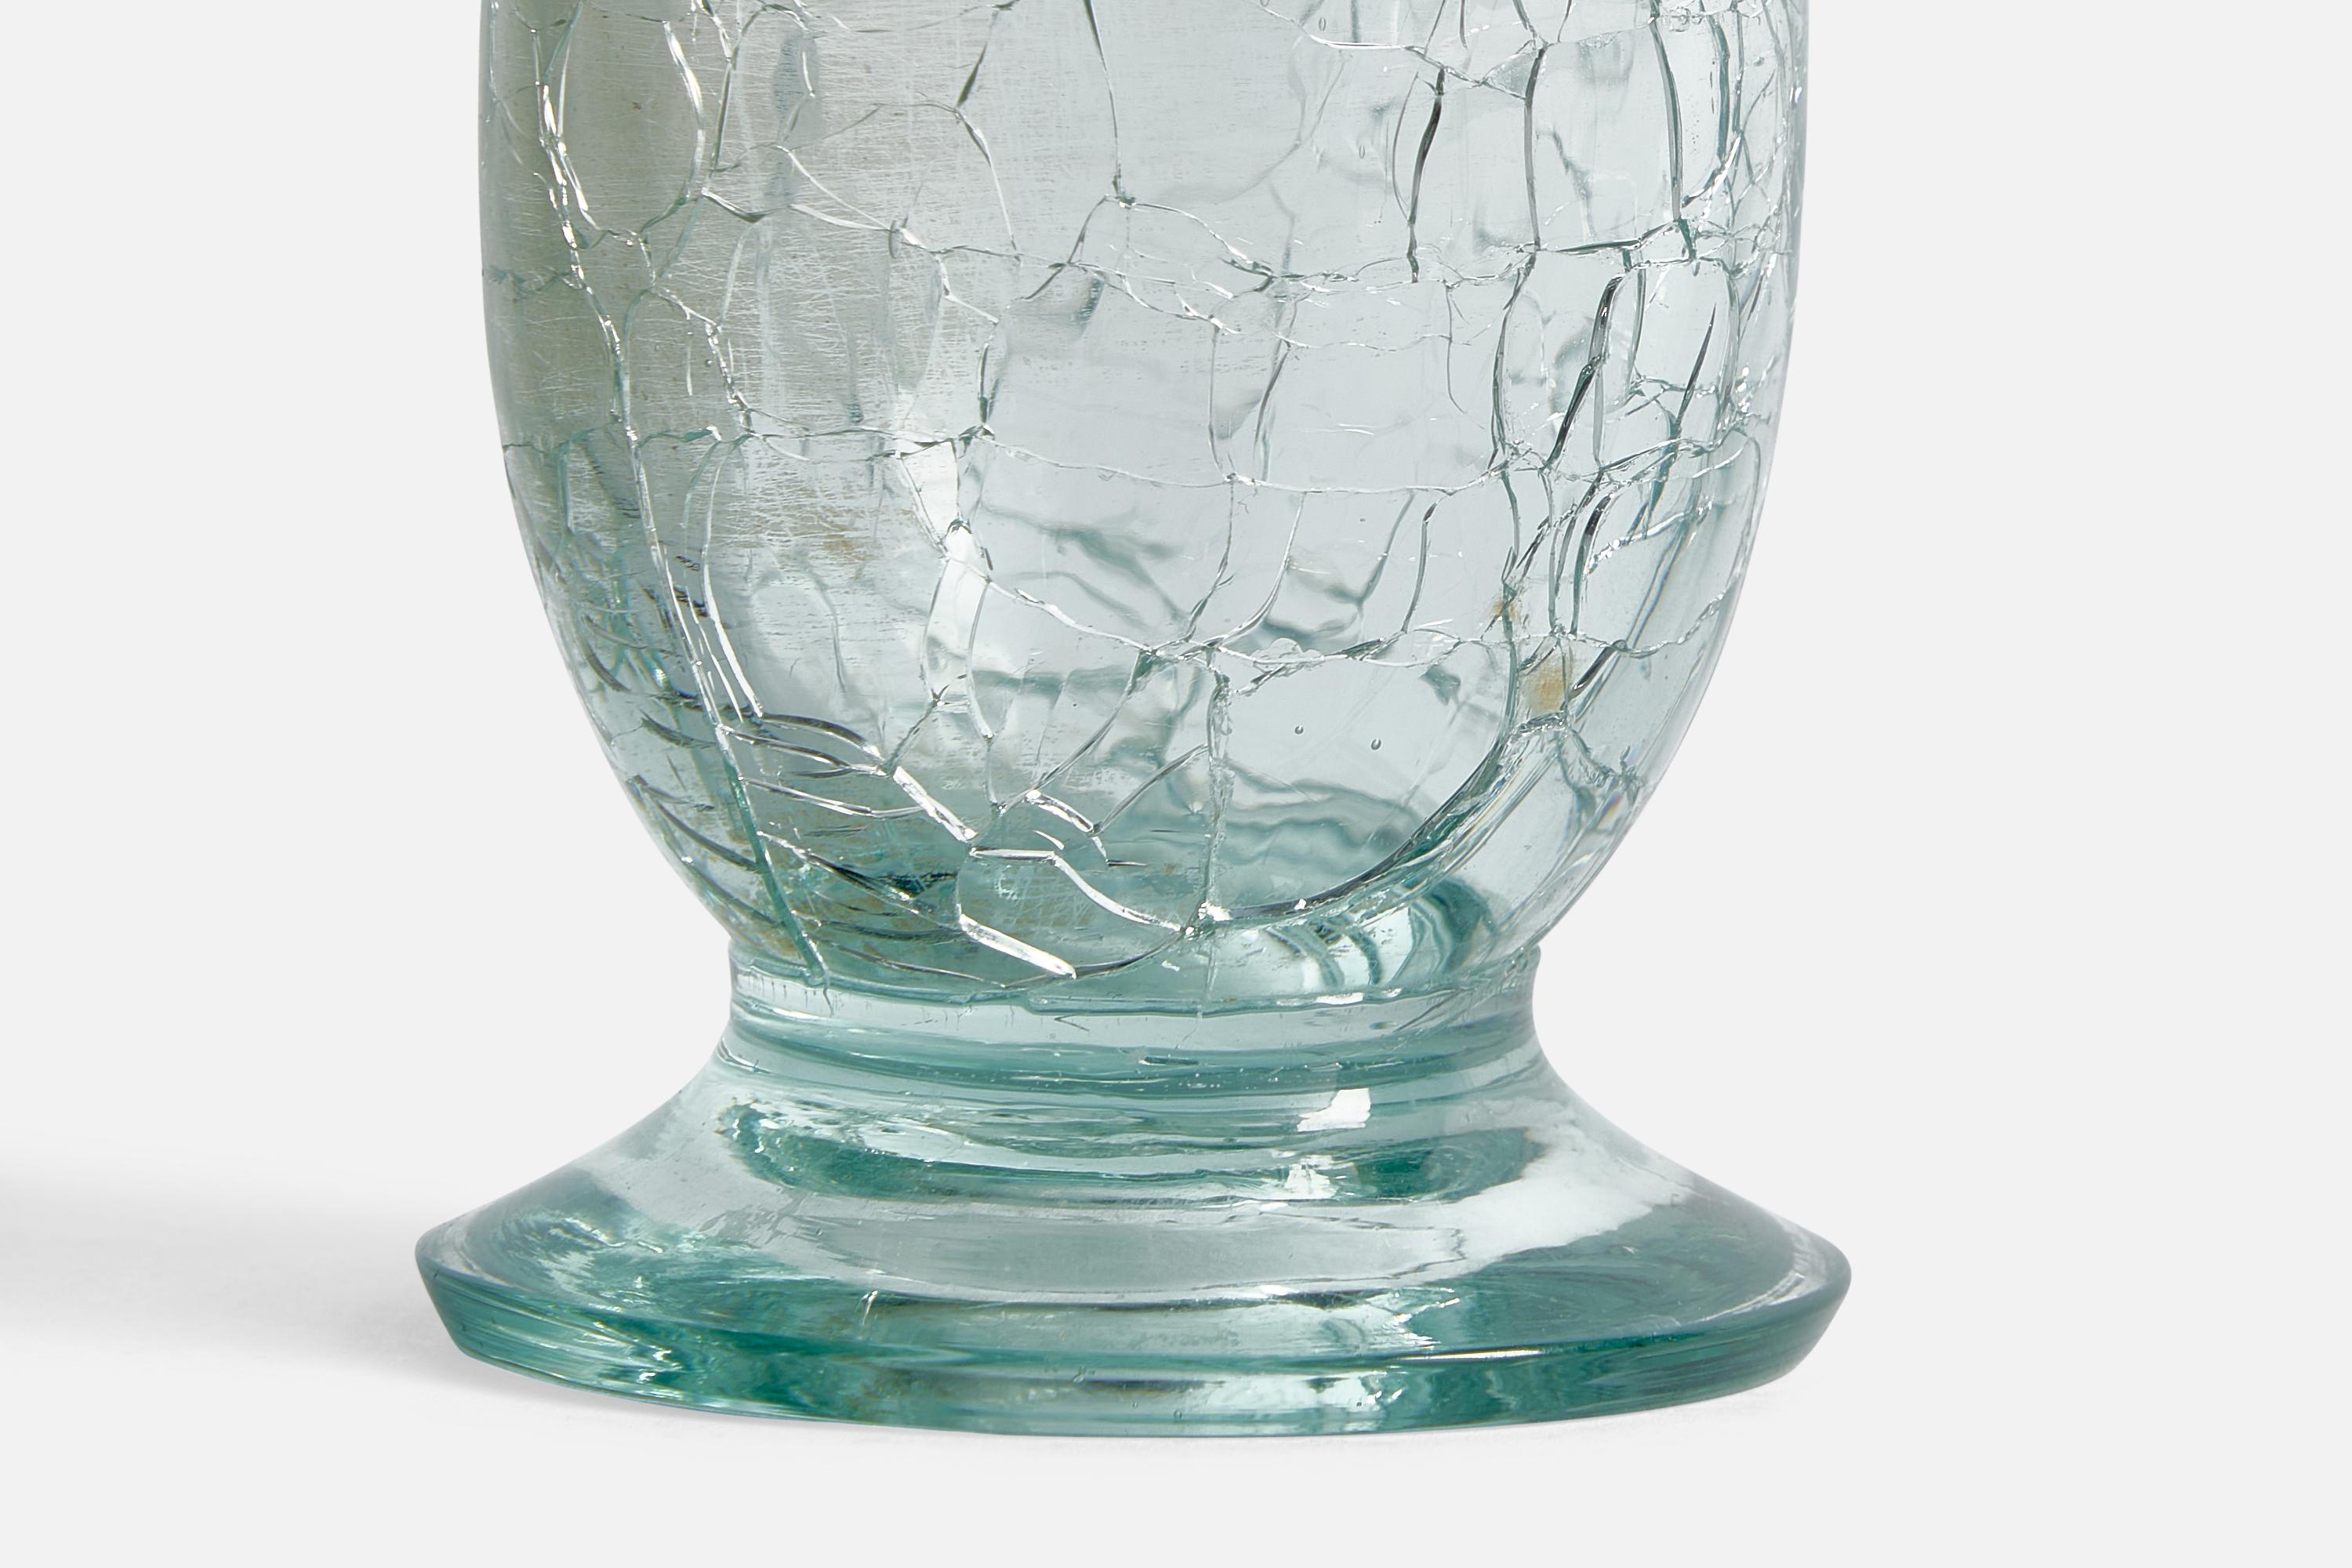 Mid-20th Century Ture Berglund, Small Pitcher, Glass, Sweden, 1940s For Sale